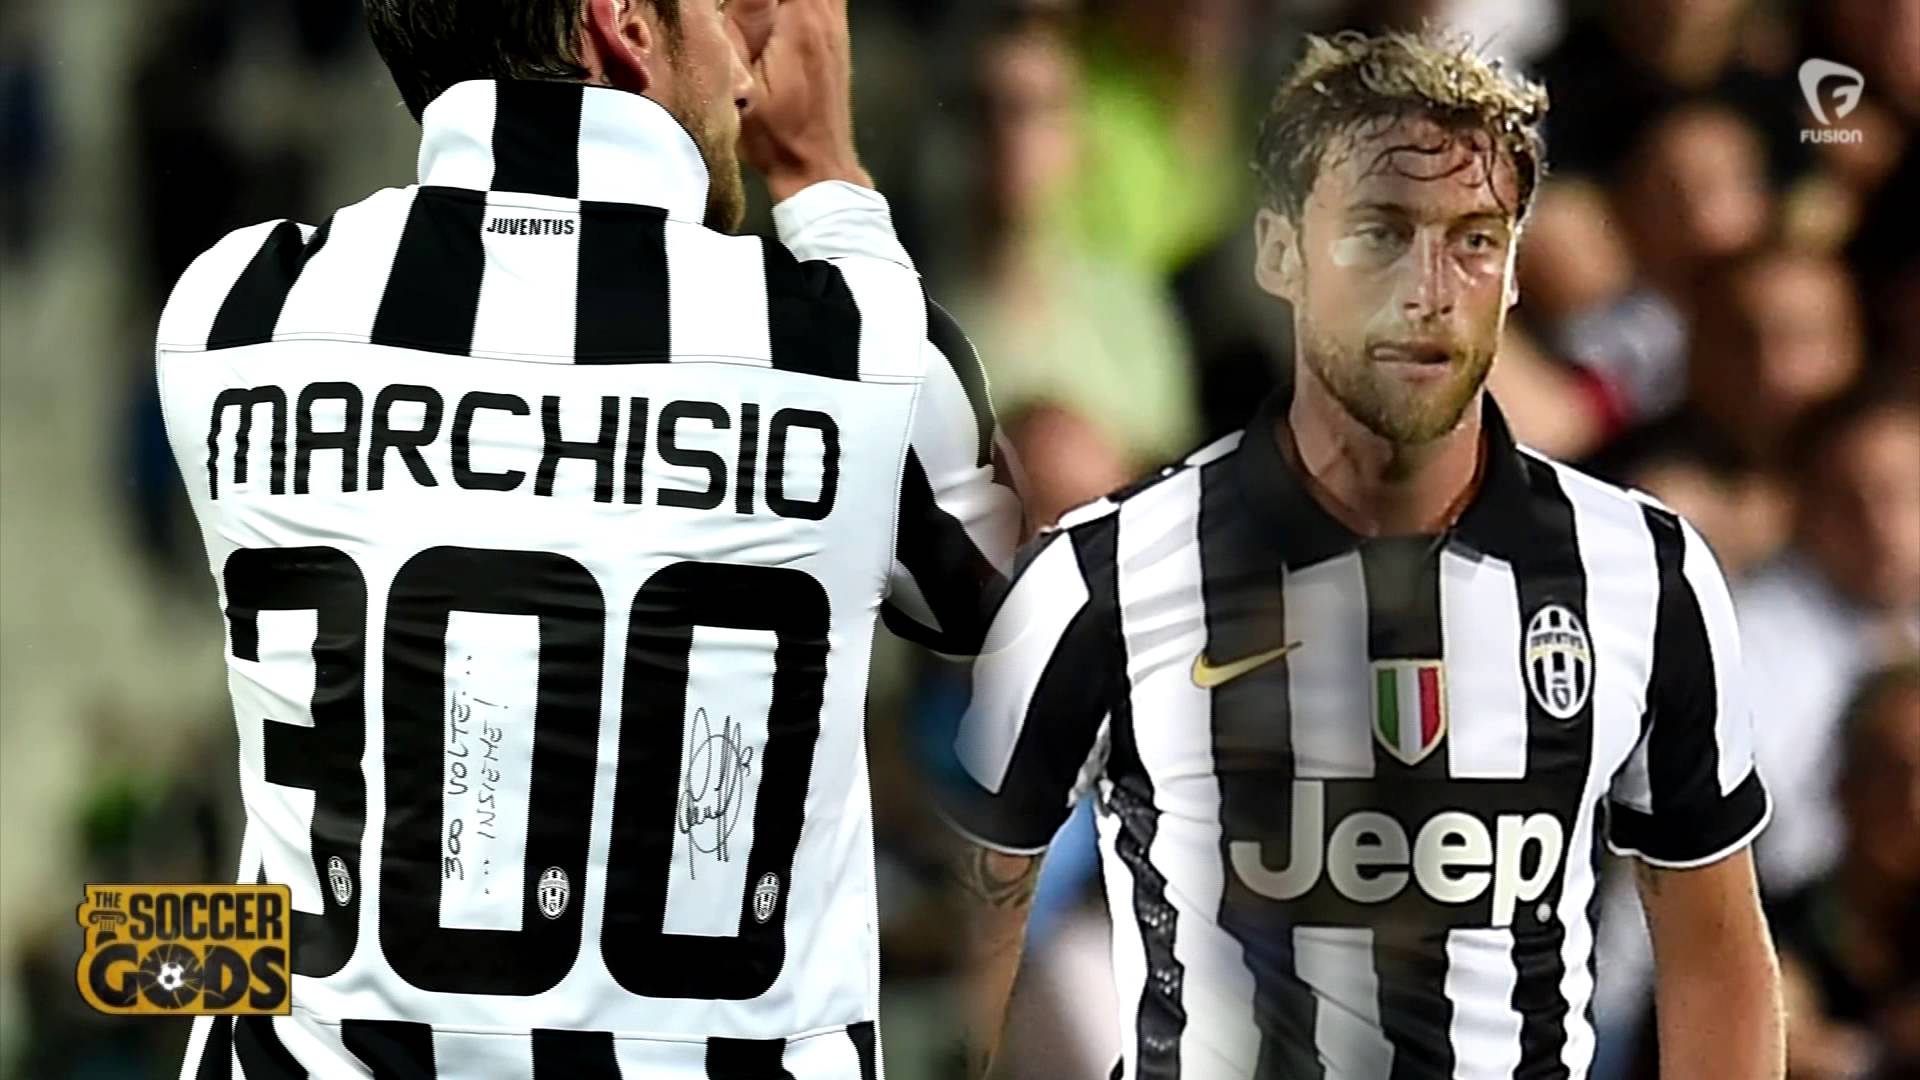 Man Crush Monday: Claudio Marchisio Is A Grower, Not A Show Er